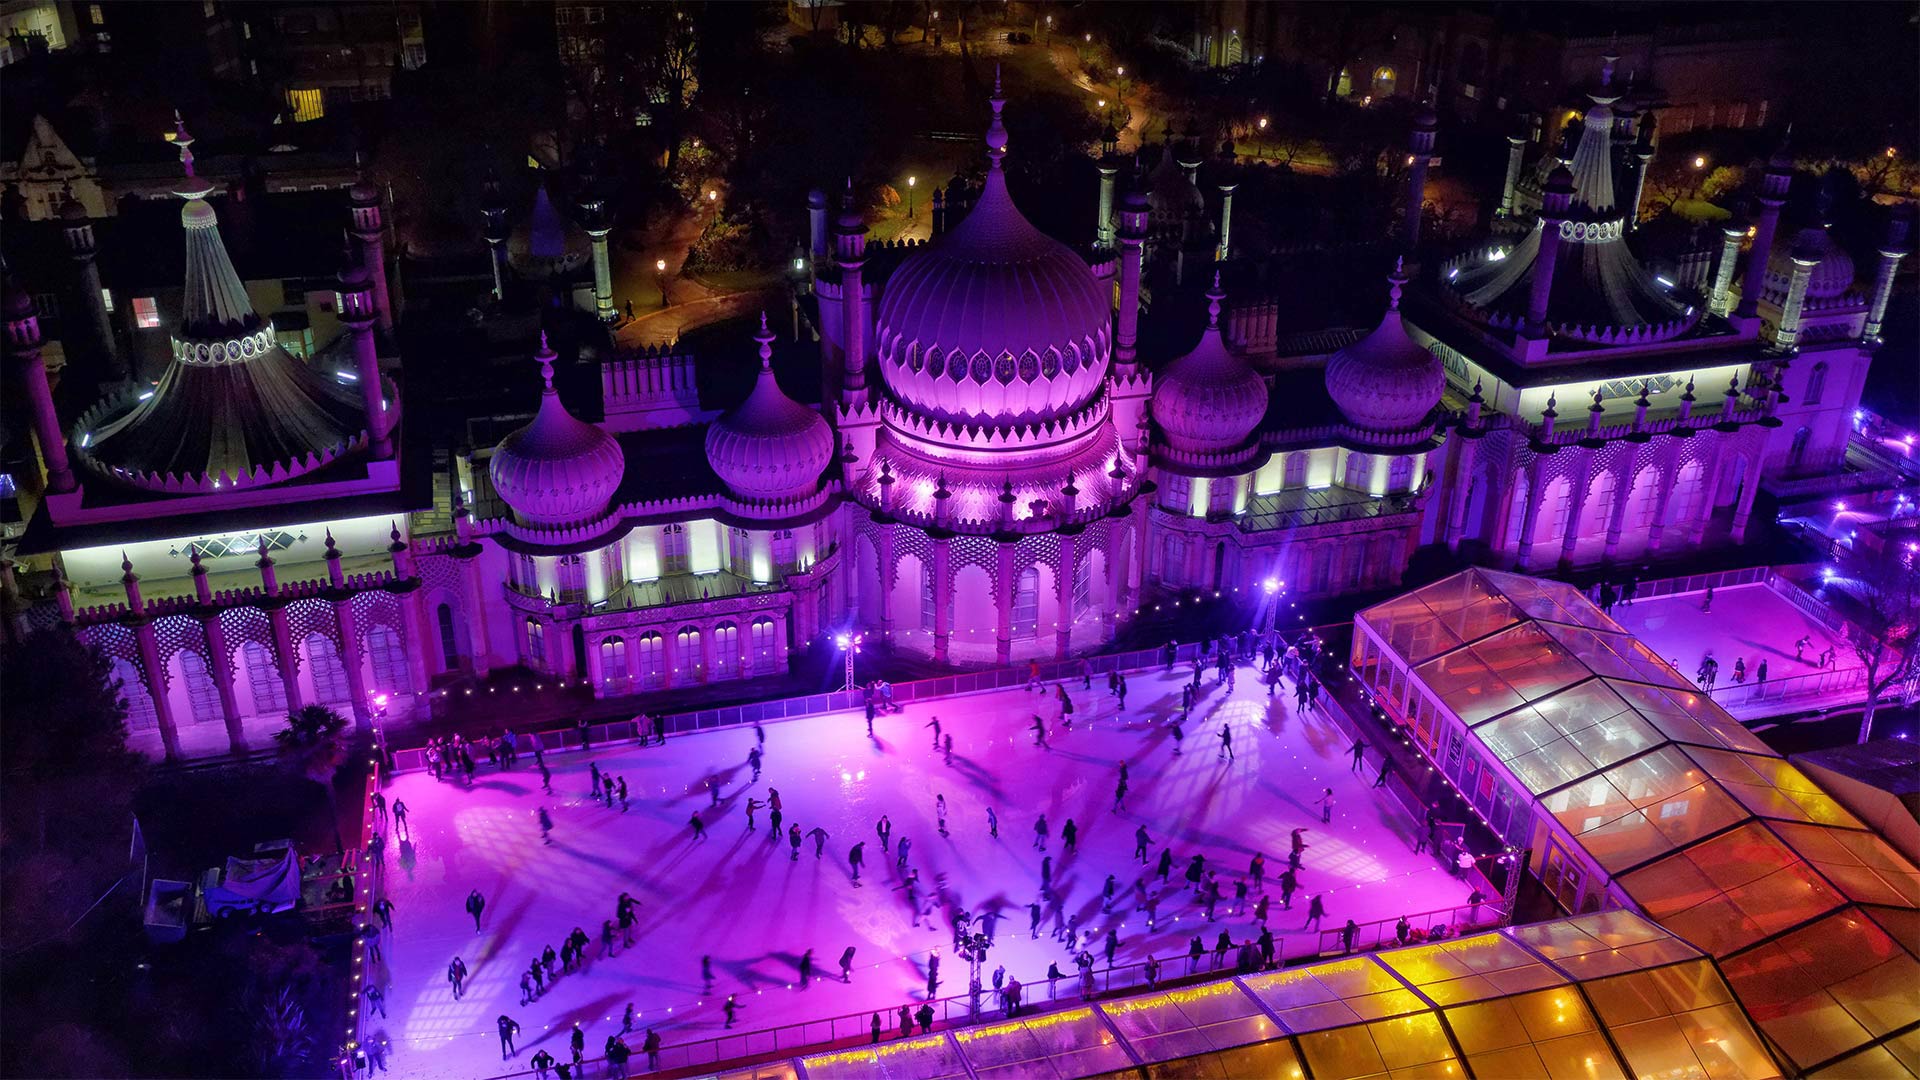 Royal Pavilion Ice Rink in Brighton, England - Chris Gorman/Getty Images)